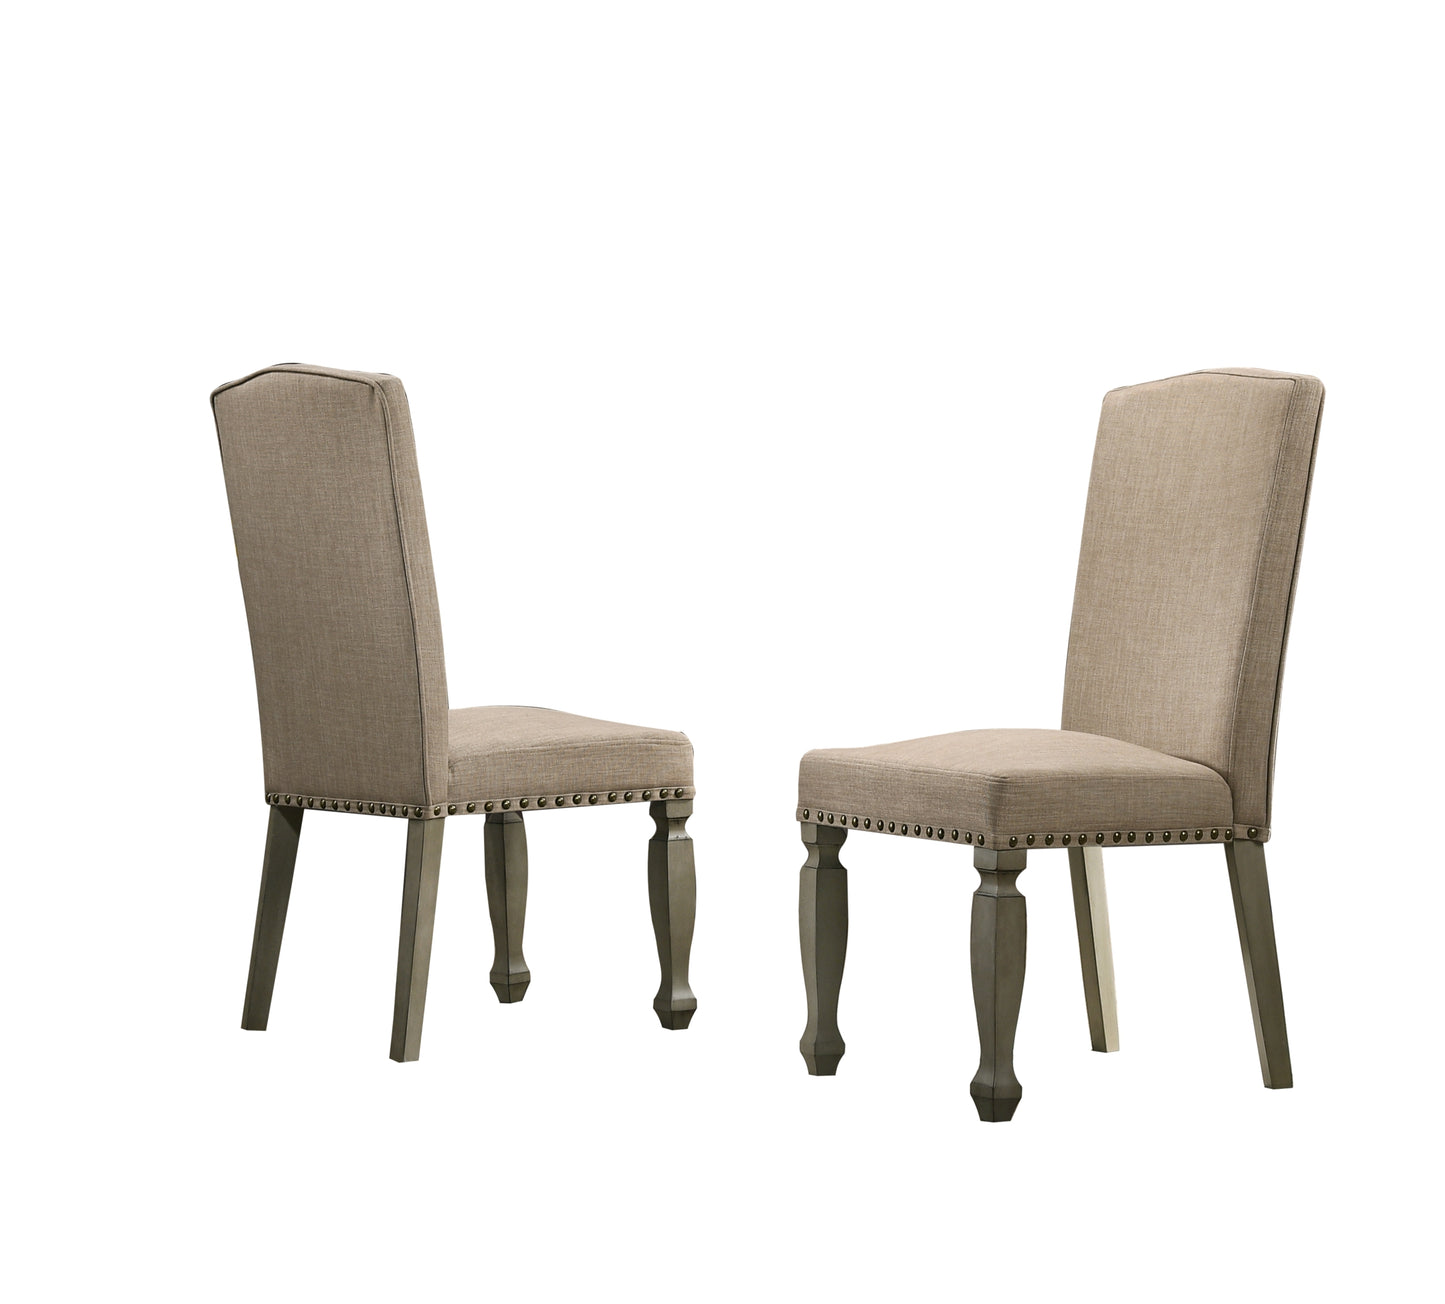 Breda Antique Gray Finish Upholstered Nailhead Dining Chair, Set of 2